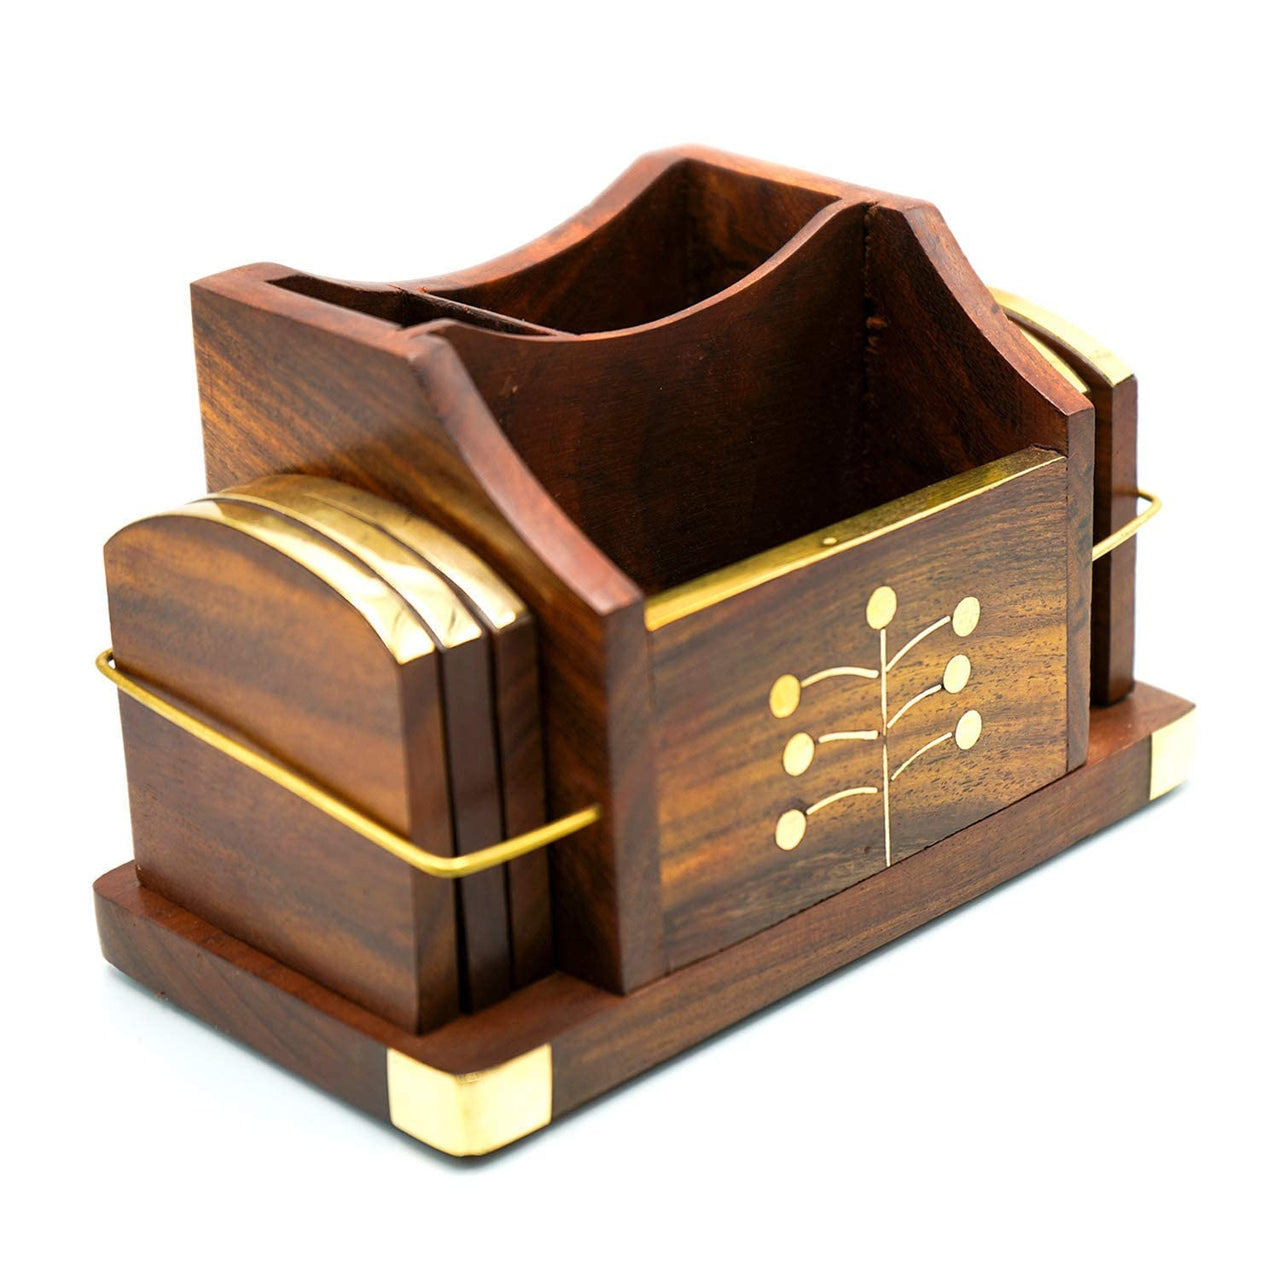 Wooden Handmade Napkin Holder cum Cutlery Holder Decorative and Stylish Wooden Tissue Box for Car, Home, Office Desk, Bathroom and Cafeteria Dime Store